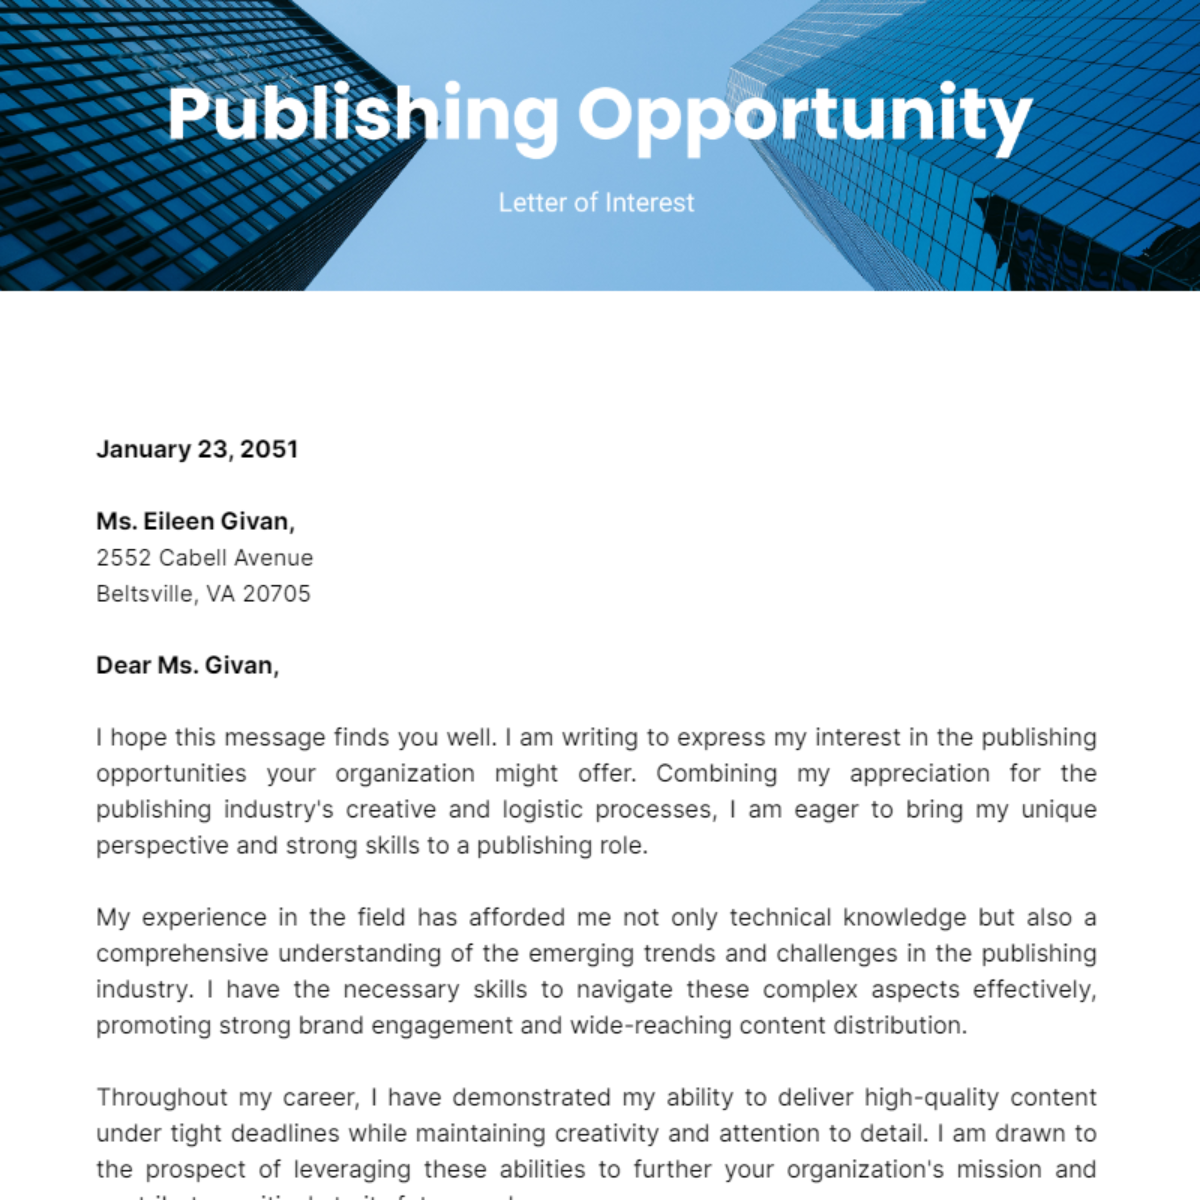 Publishing Opportunity Letter of Interest Template